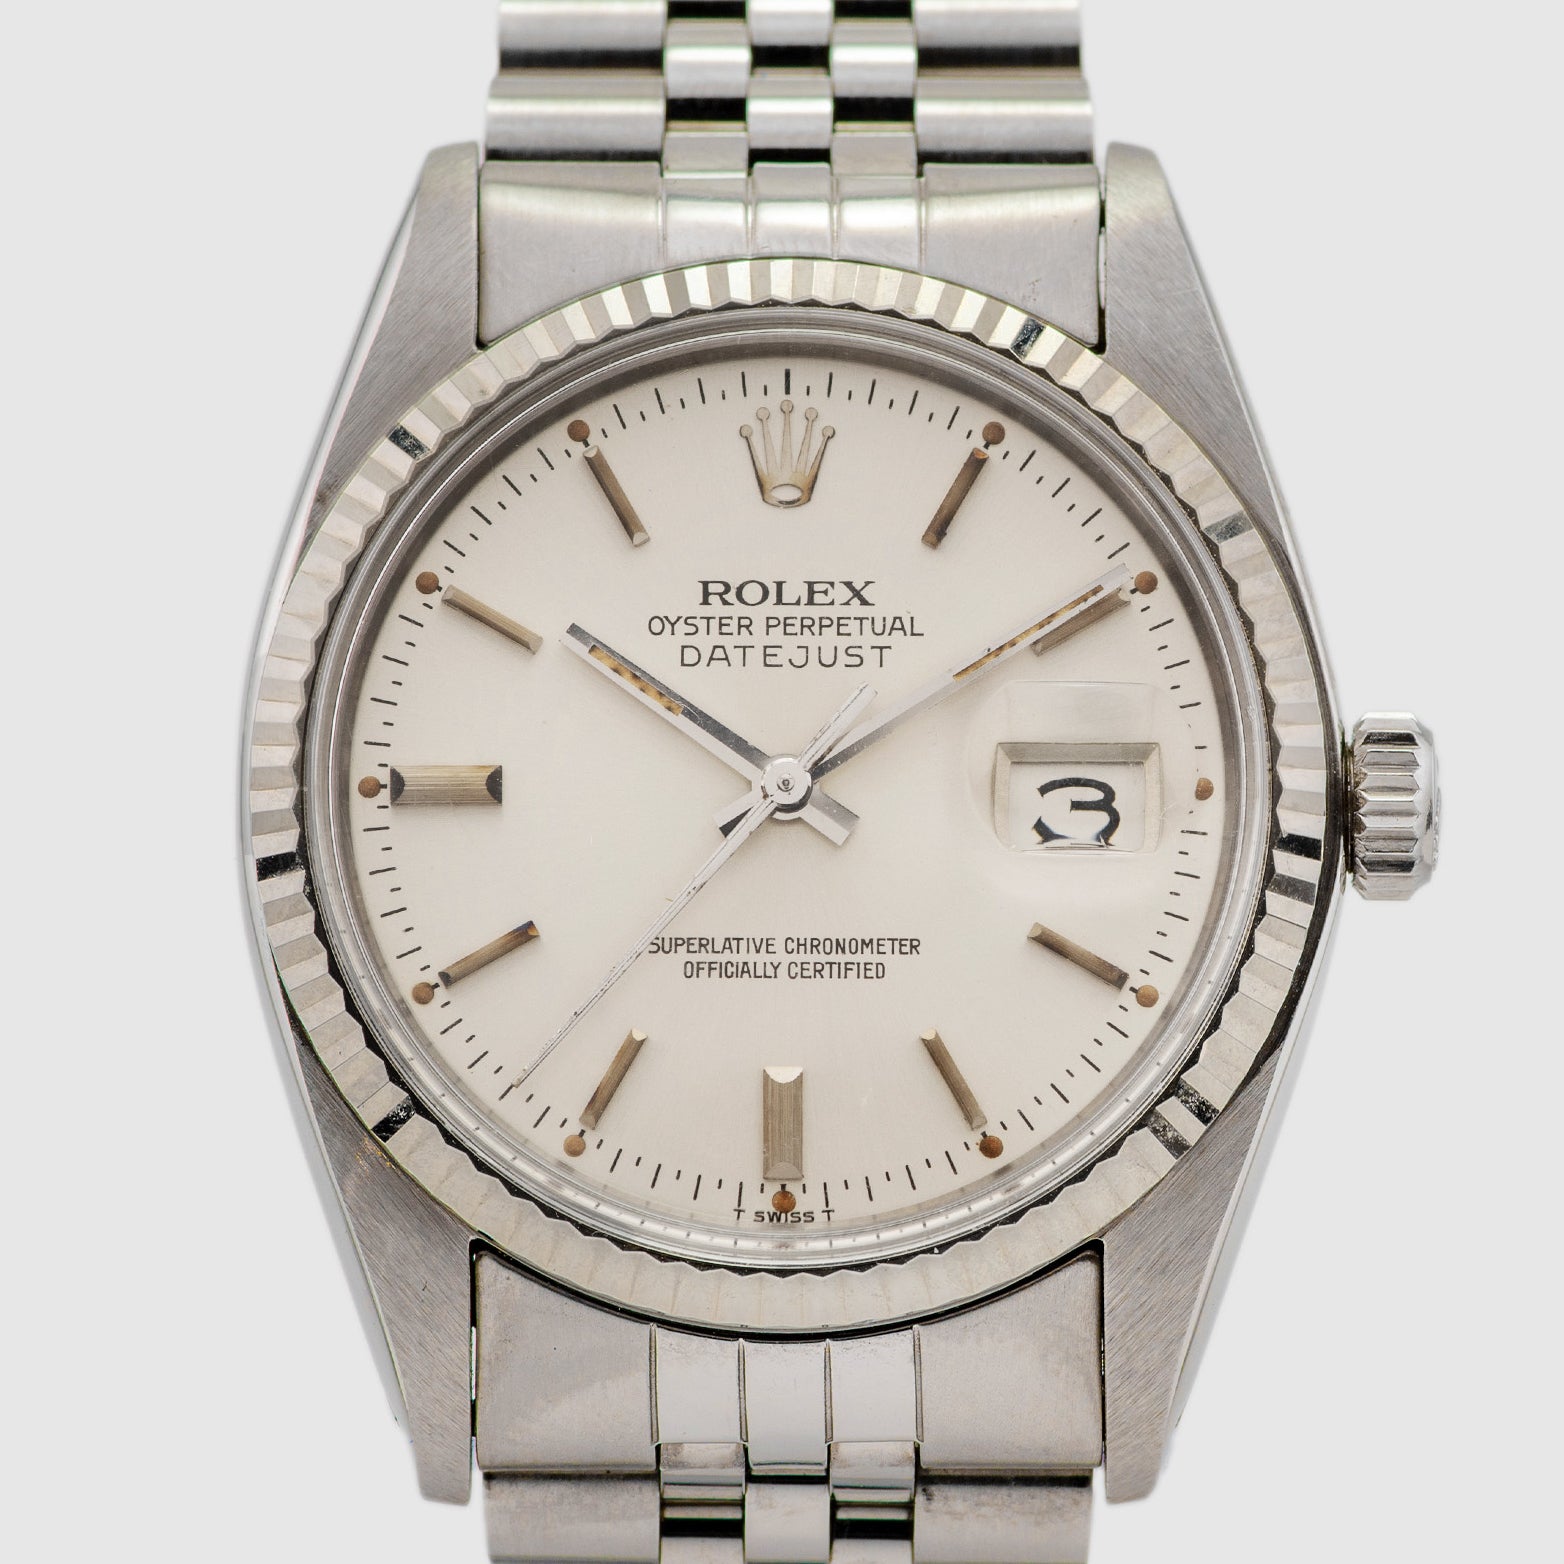 1979 Rolex Datejust New Old Stock Ref. 16014 (with Papers)